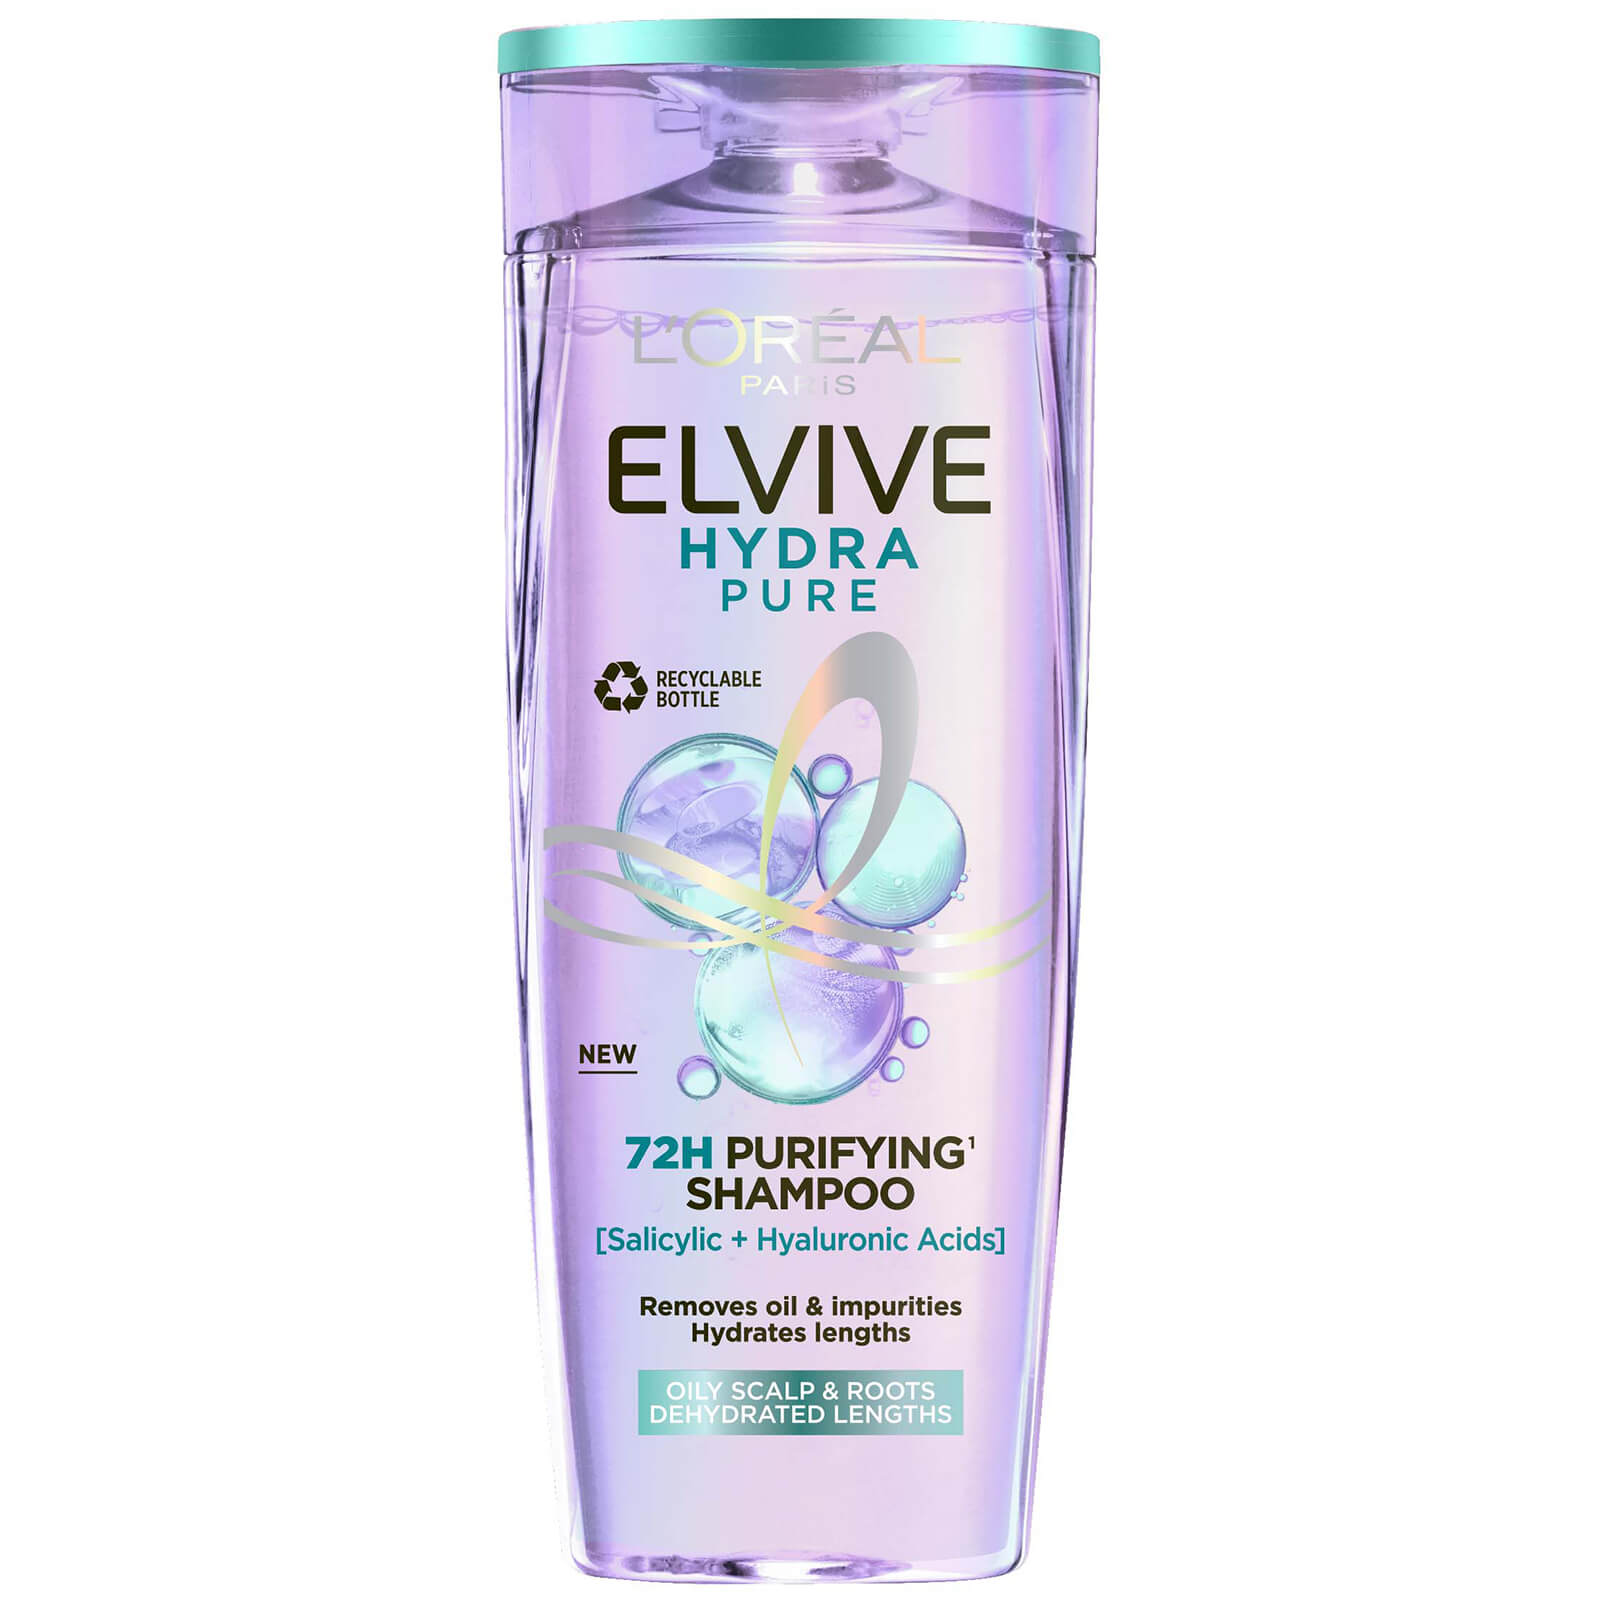 L'Oreal Paris Elvive Hydra Pure 72h Purifying Shampoo with Hyaluronic and Salicylic Acids 500ml